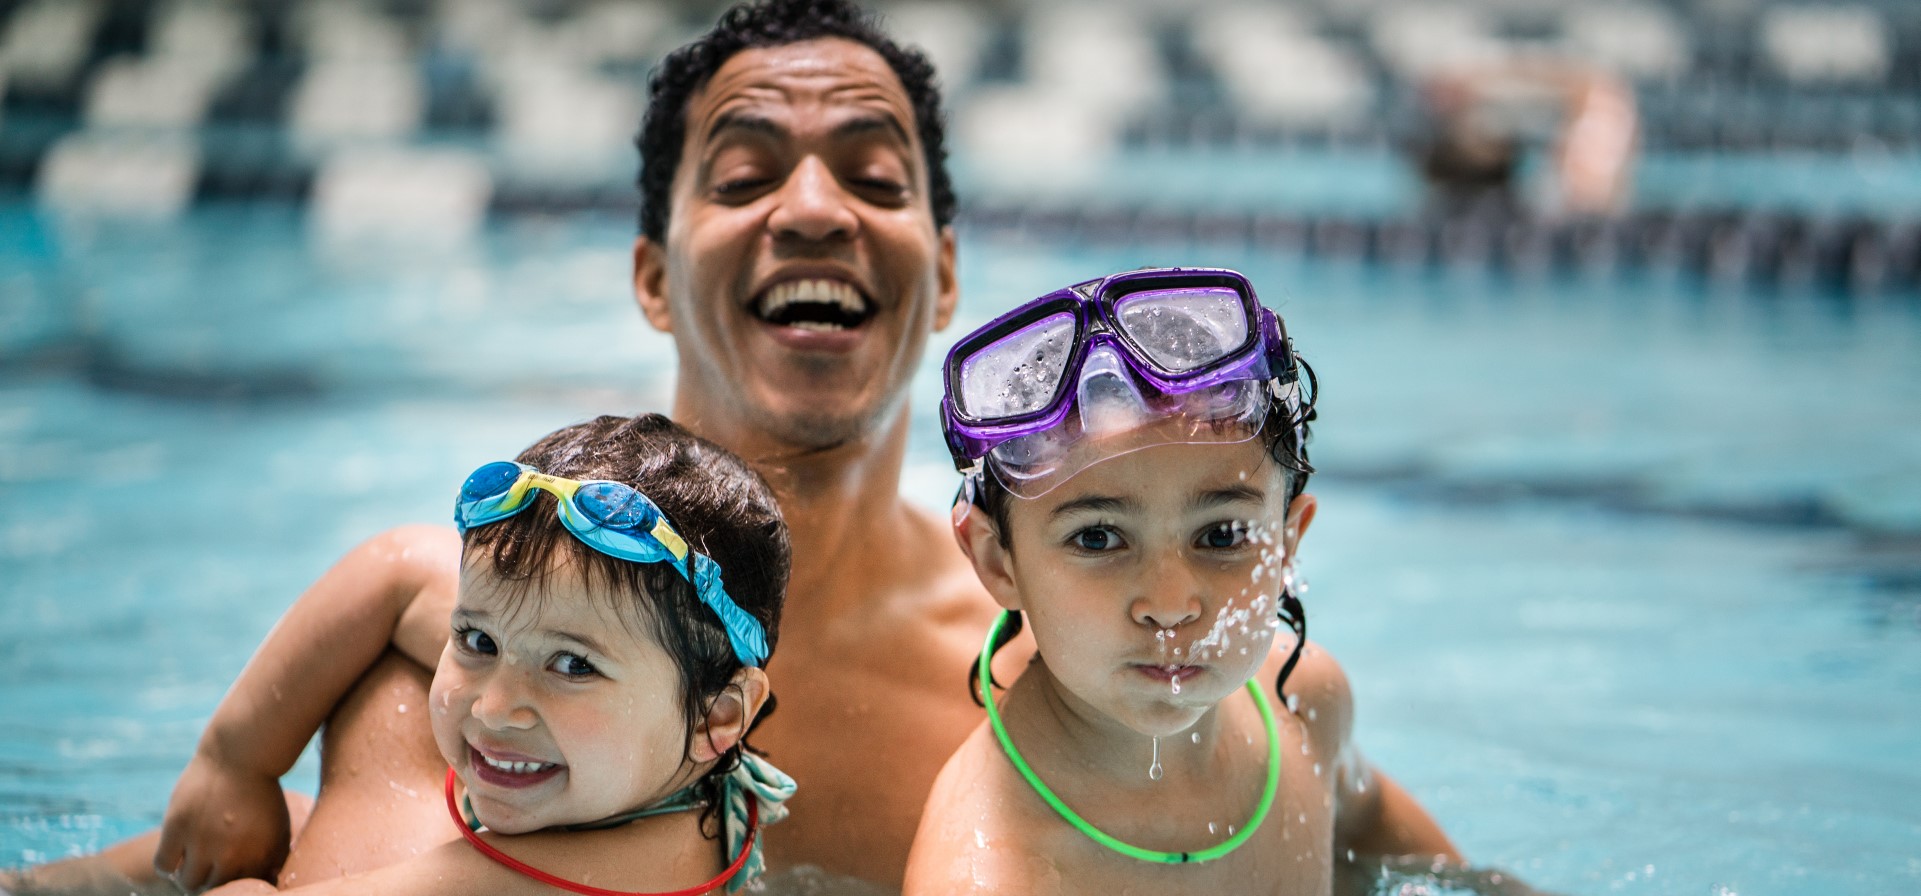 Family Events at the YMCA